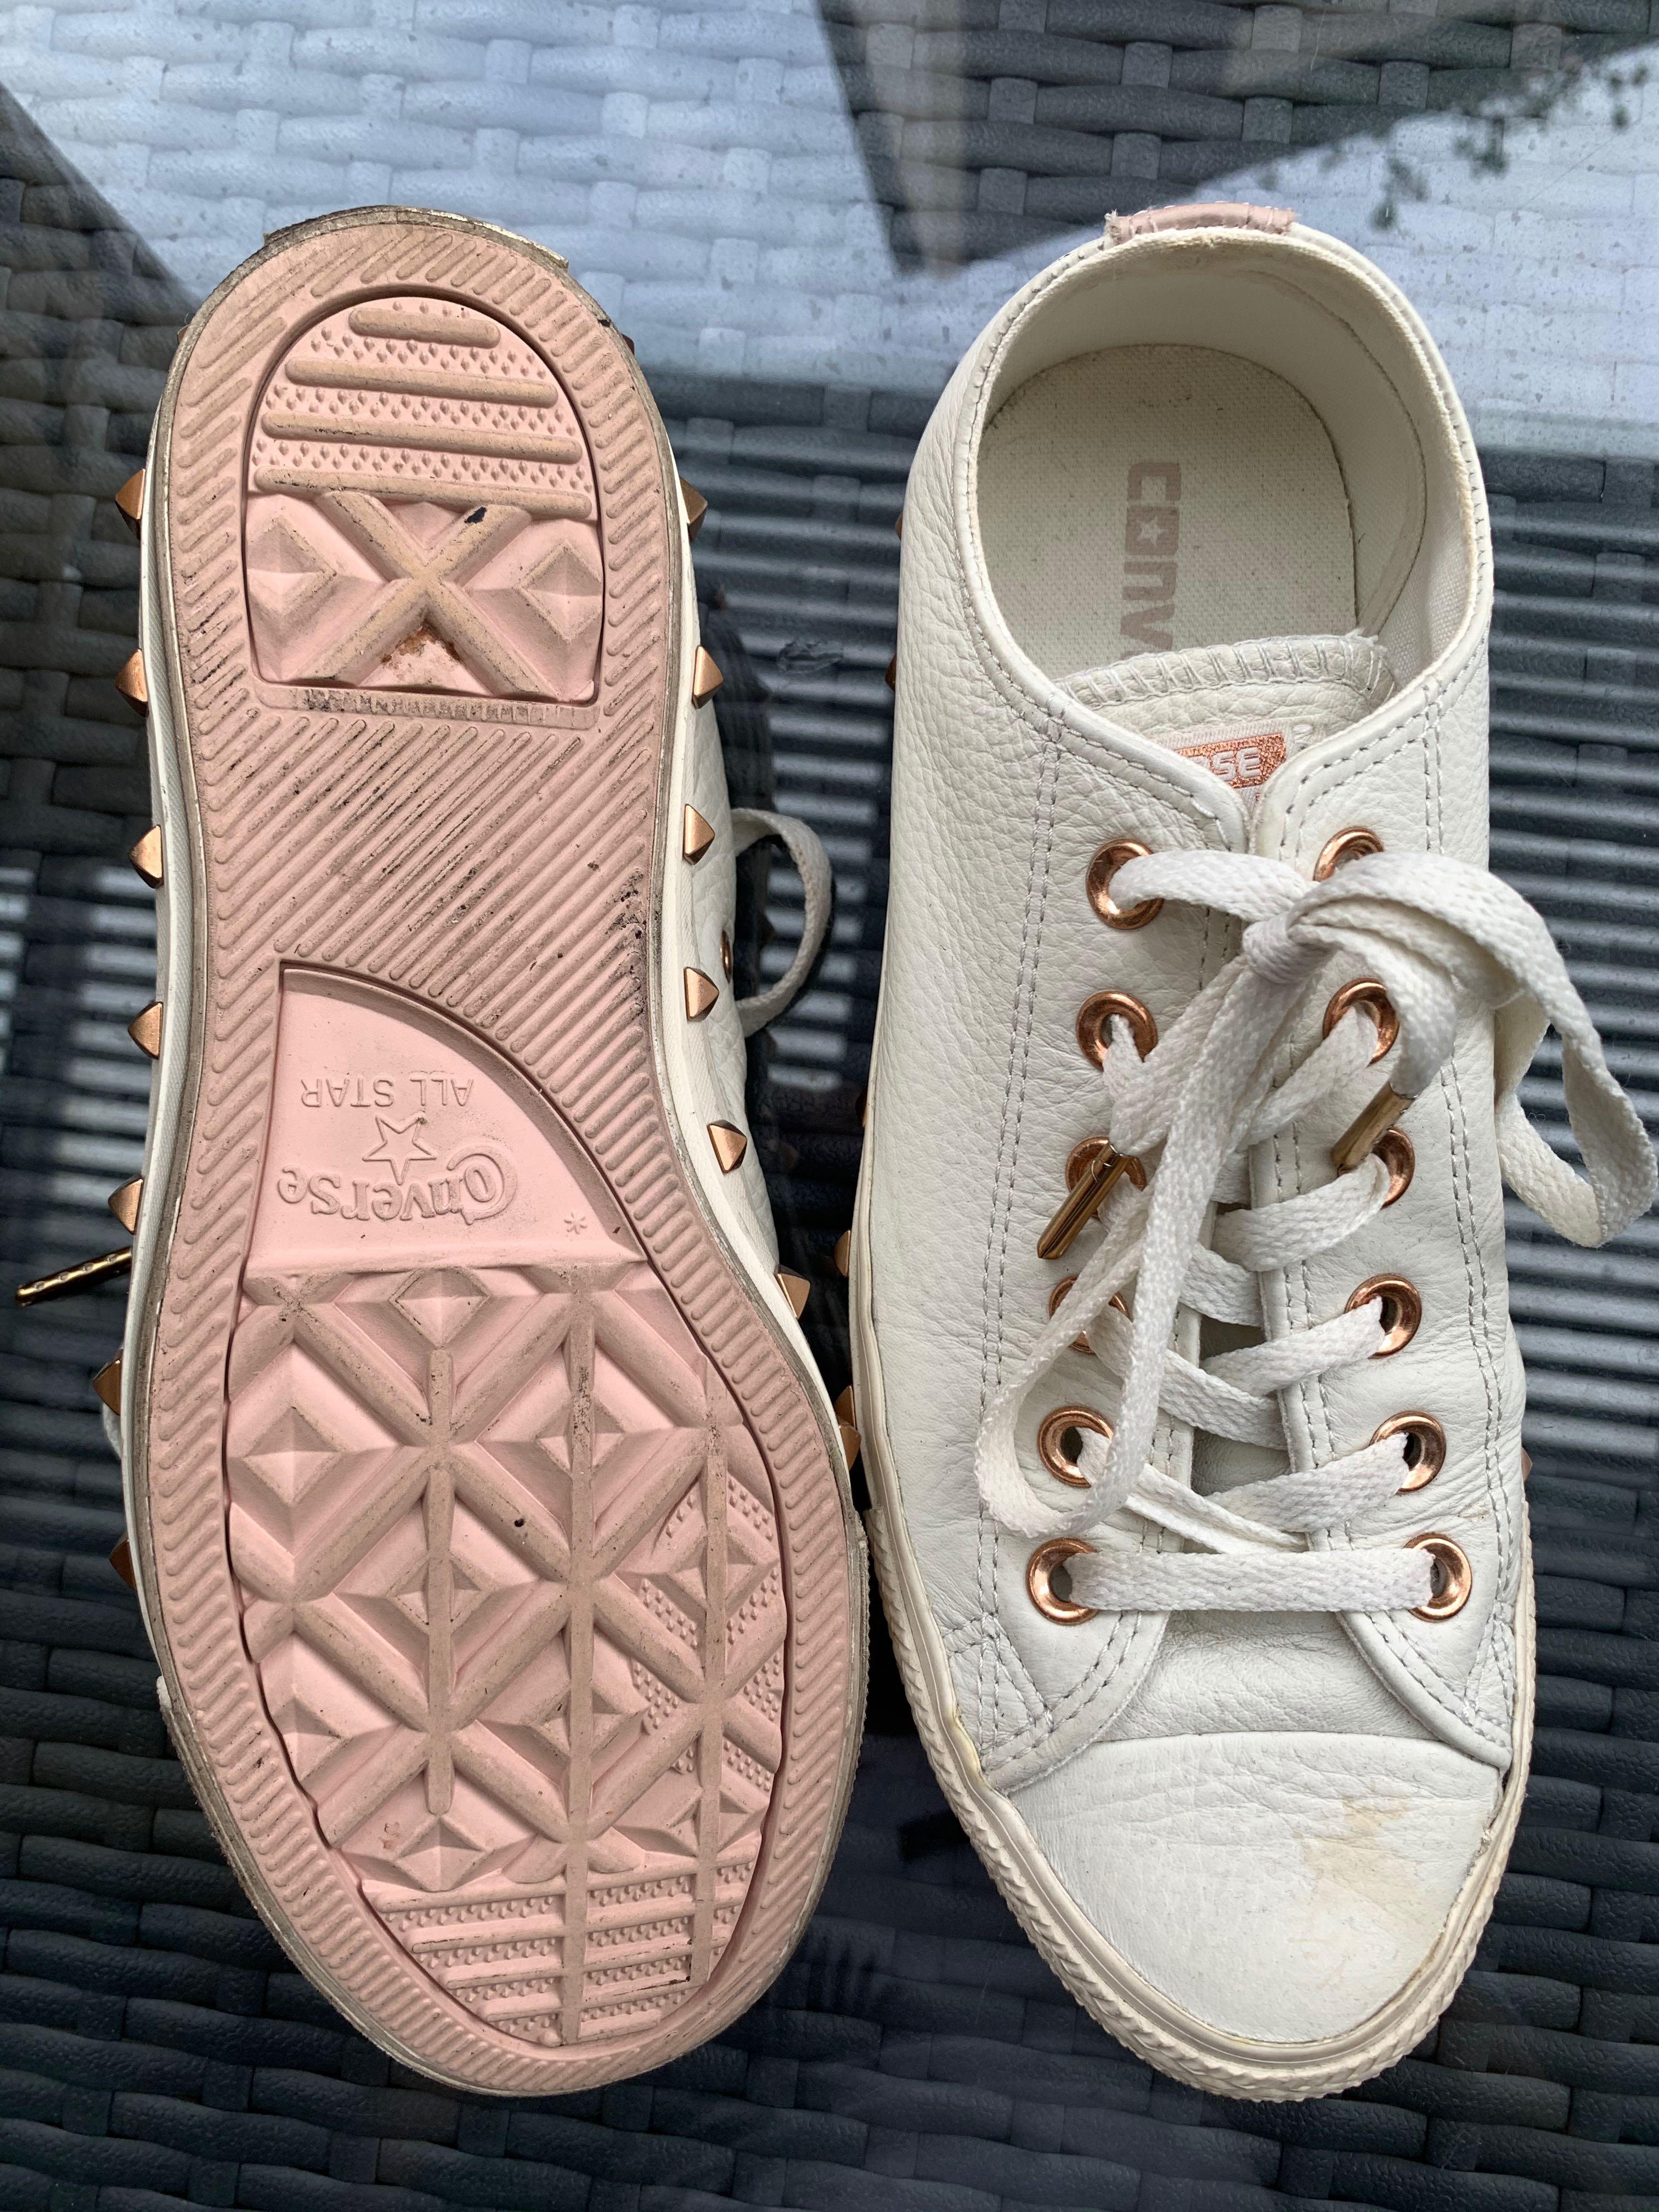 white and gold leather converse womens